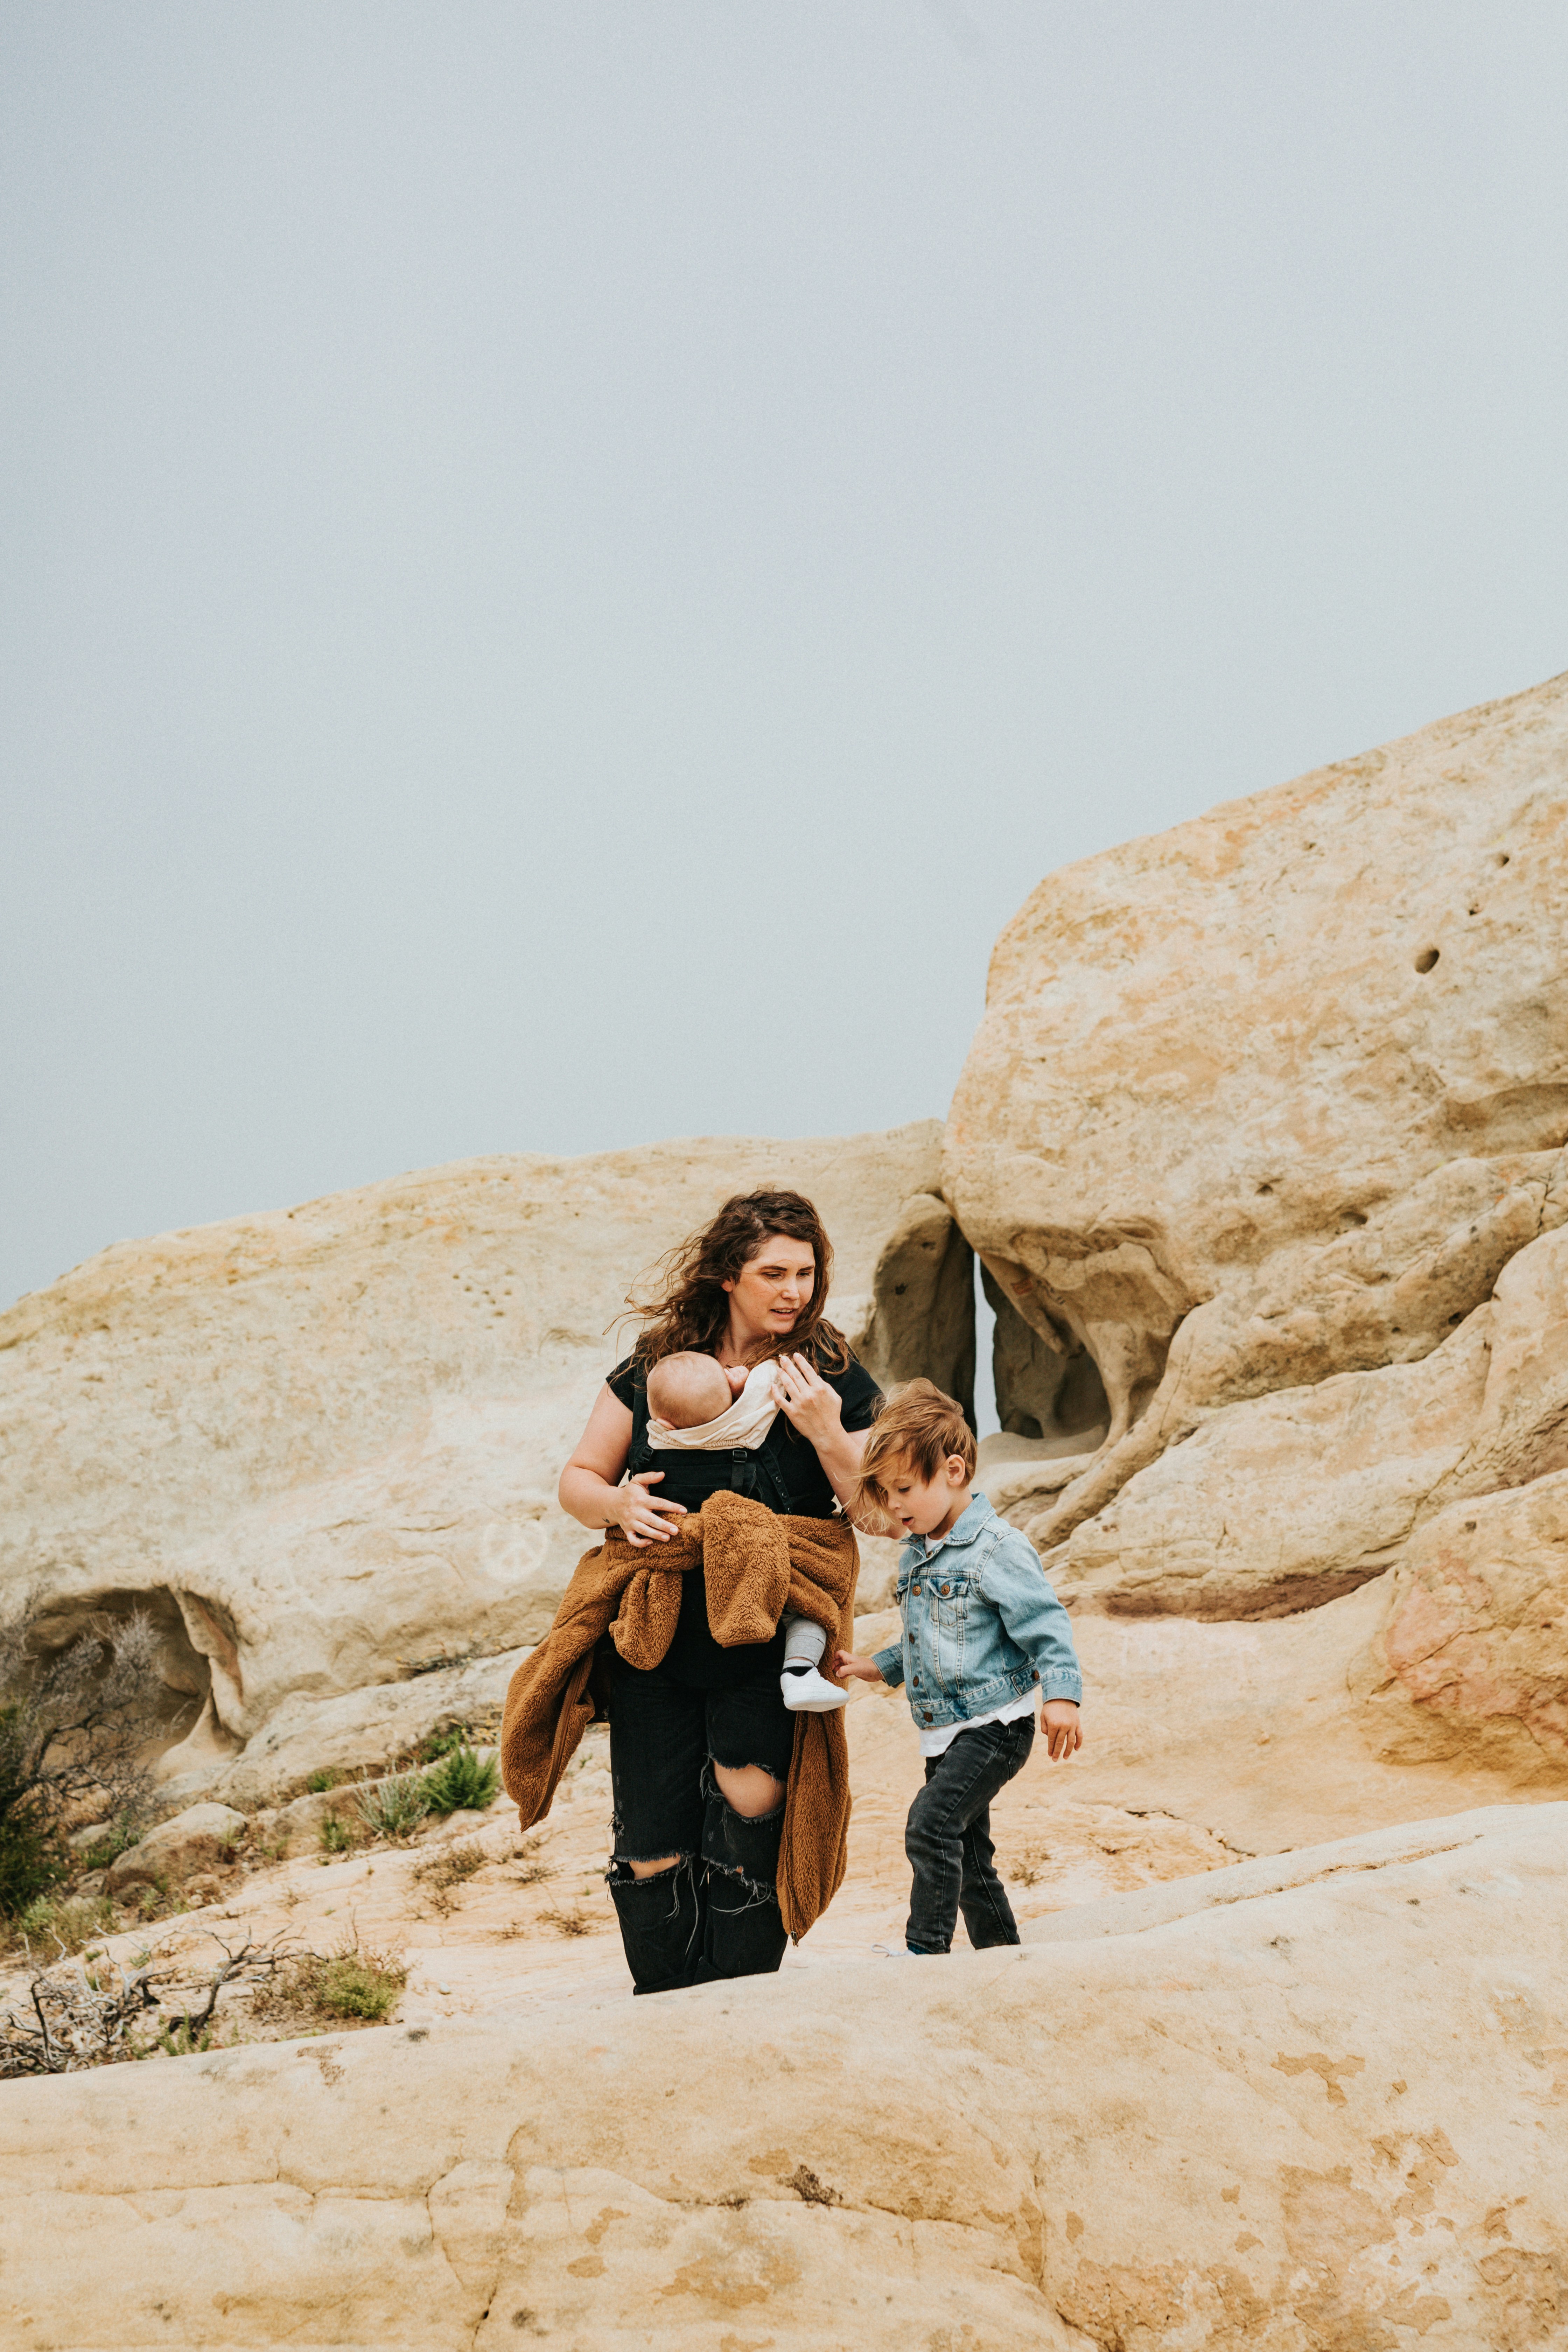 A mom with her kids in a pictoresque rocky landscape. Traveling with kids made easier